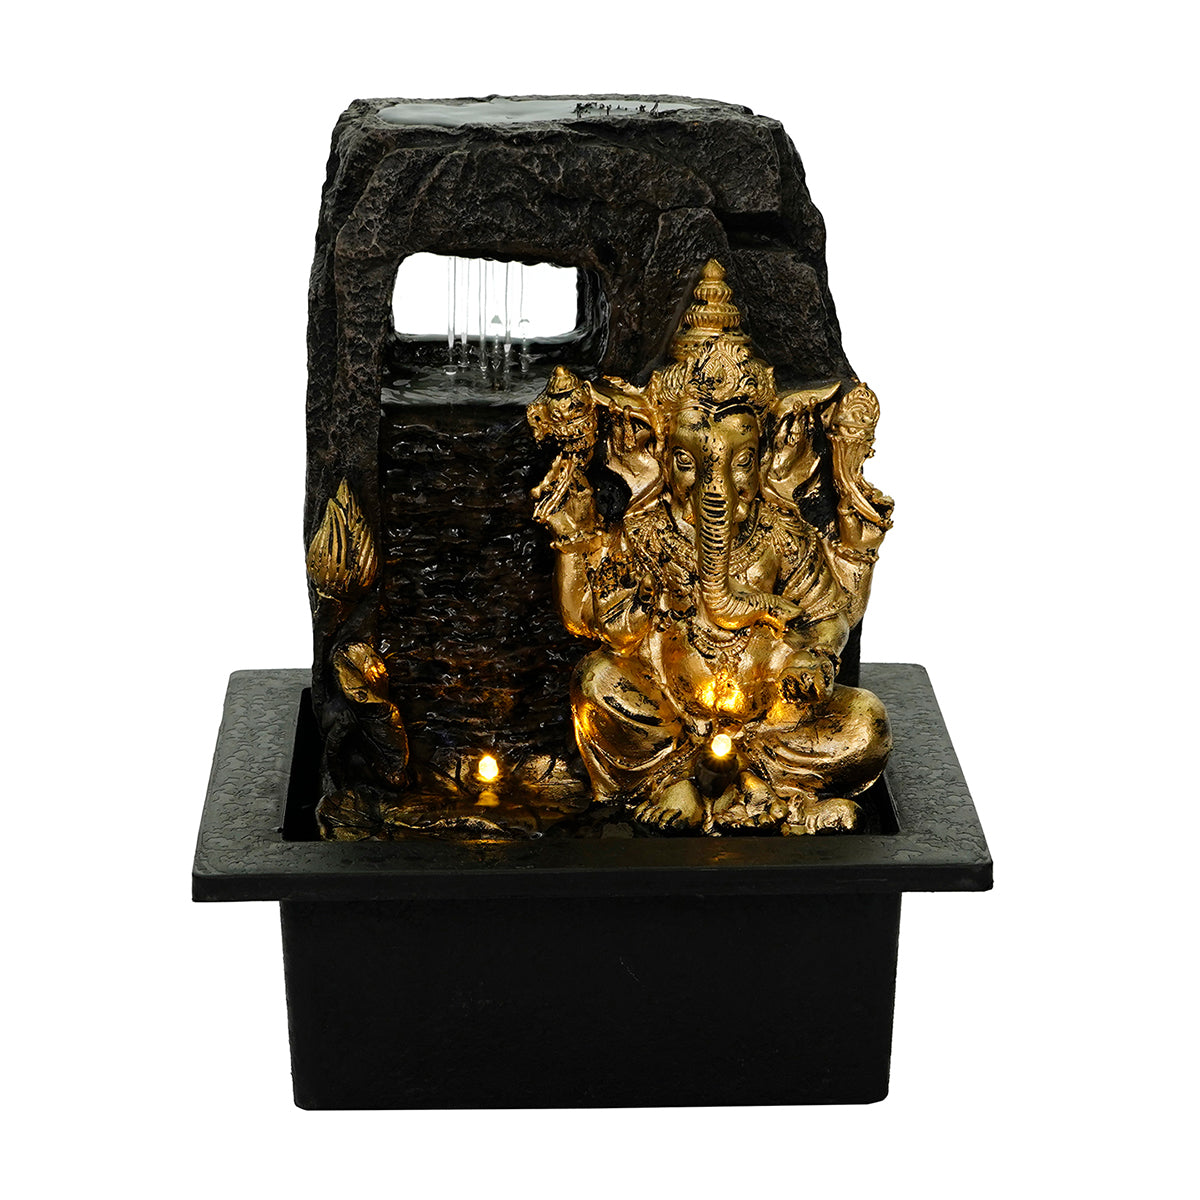 Polystone Black and Golden Lord Ganesha Water Fountain With Light For Home/Office/Indoor Decor 1